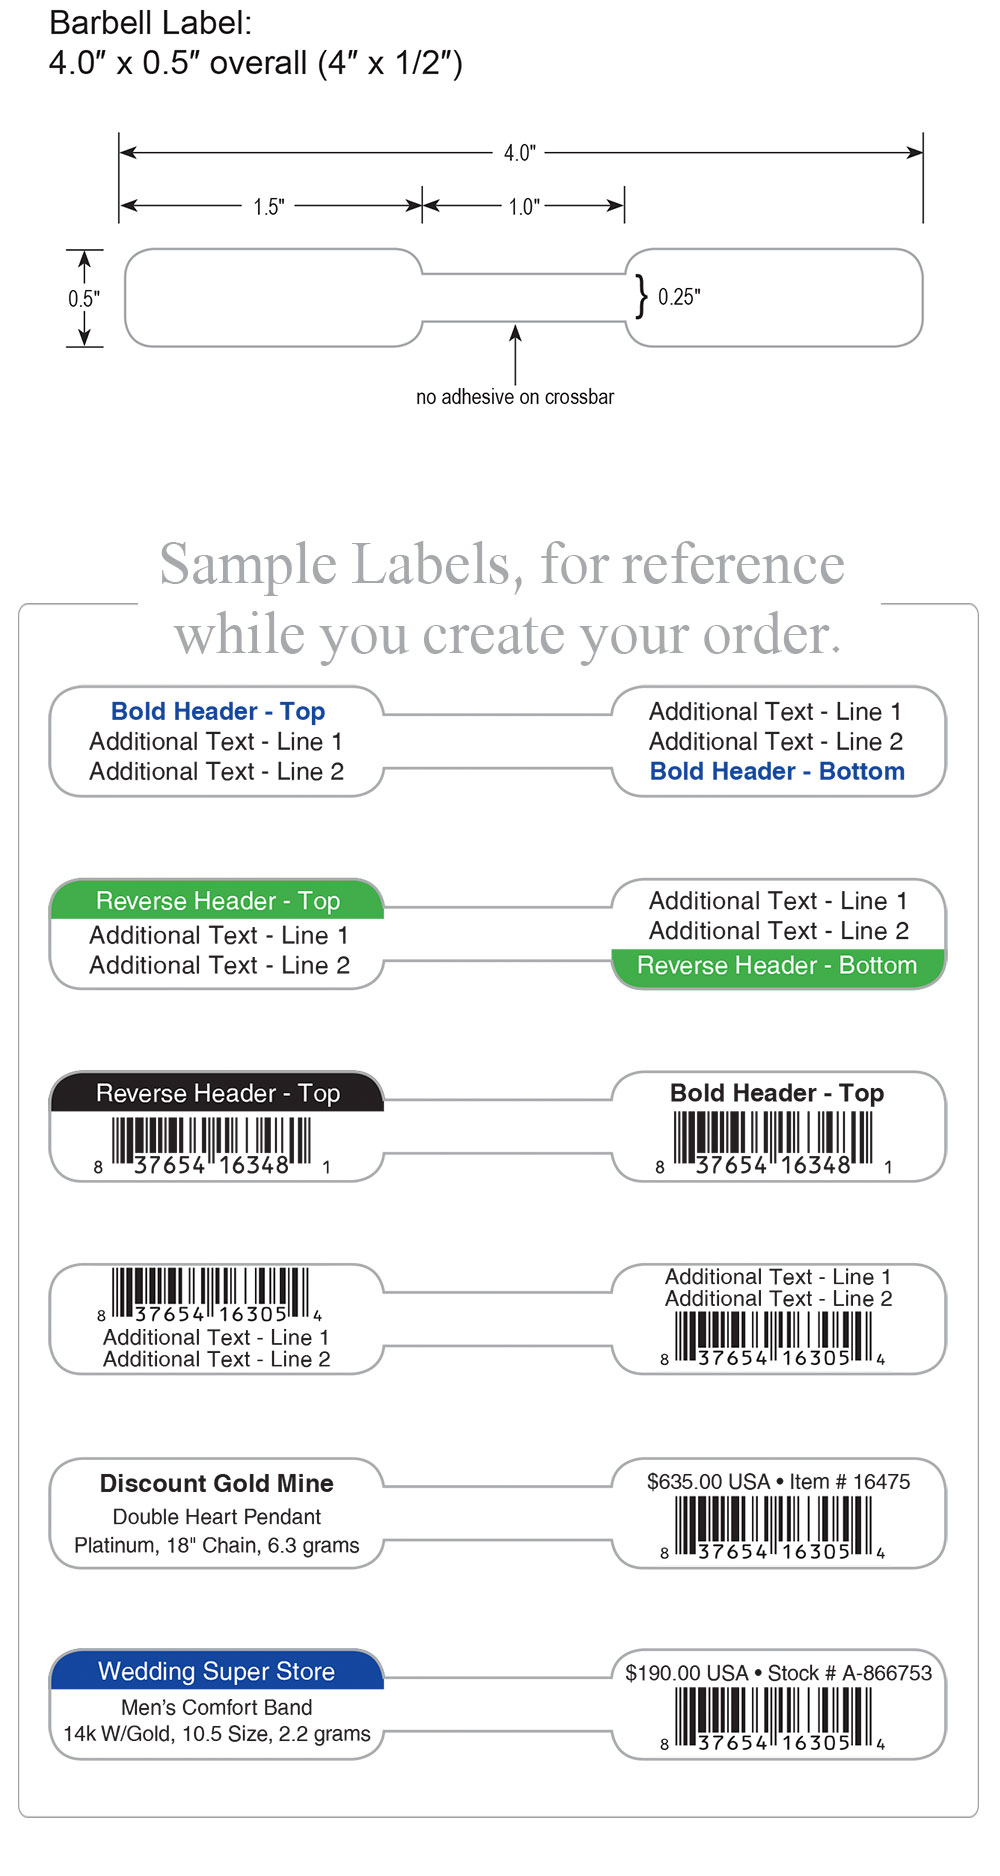  Jewelry Labels - Barbell Style, 3510 Labels Per Roll, 1 Core  - Pack of 1 Roll : Office Products